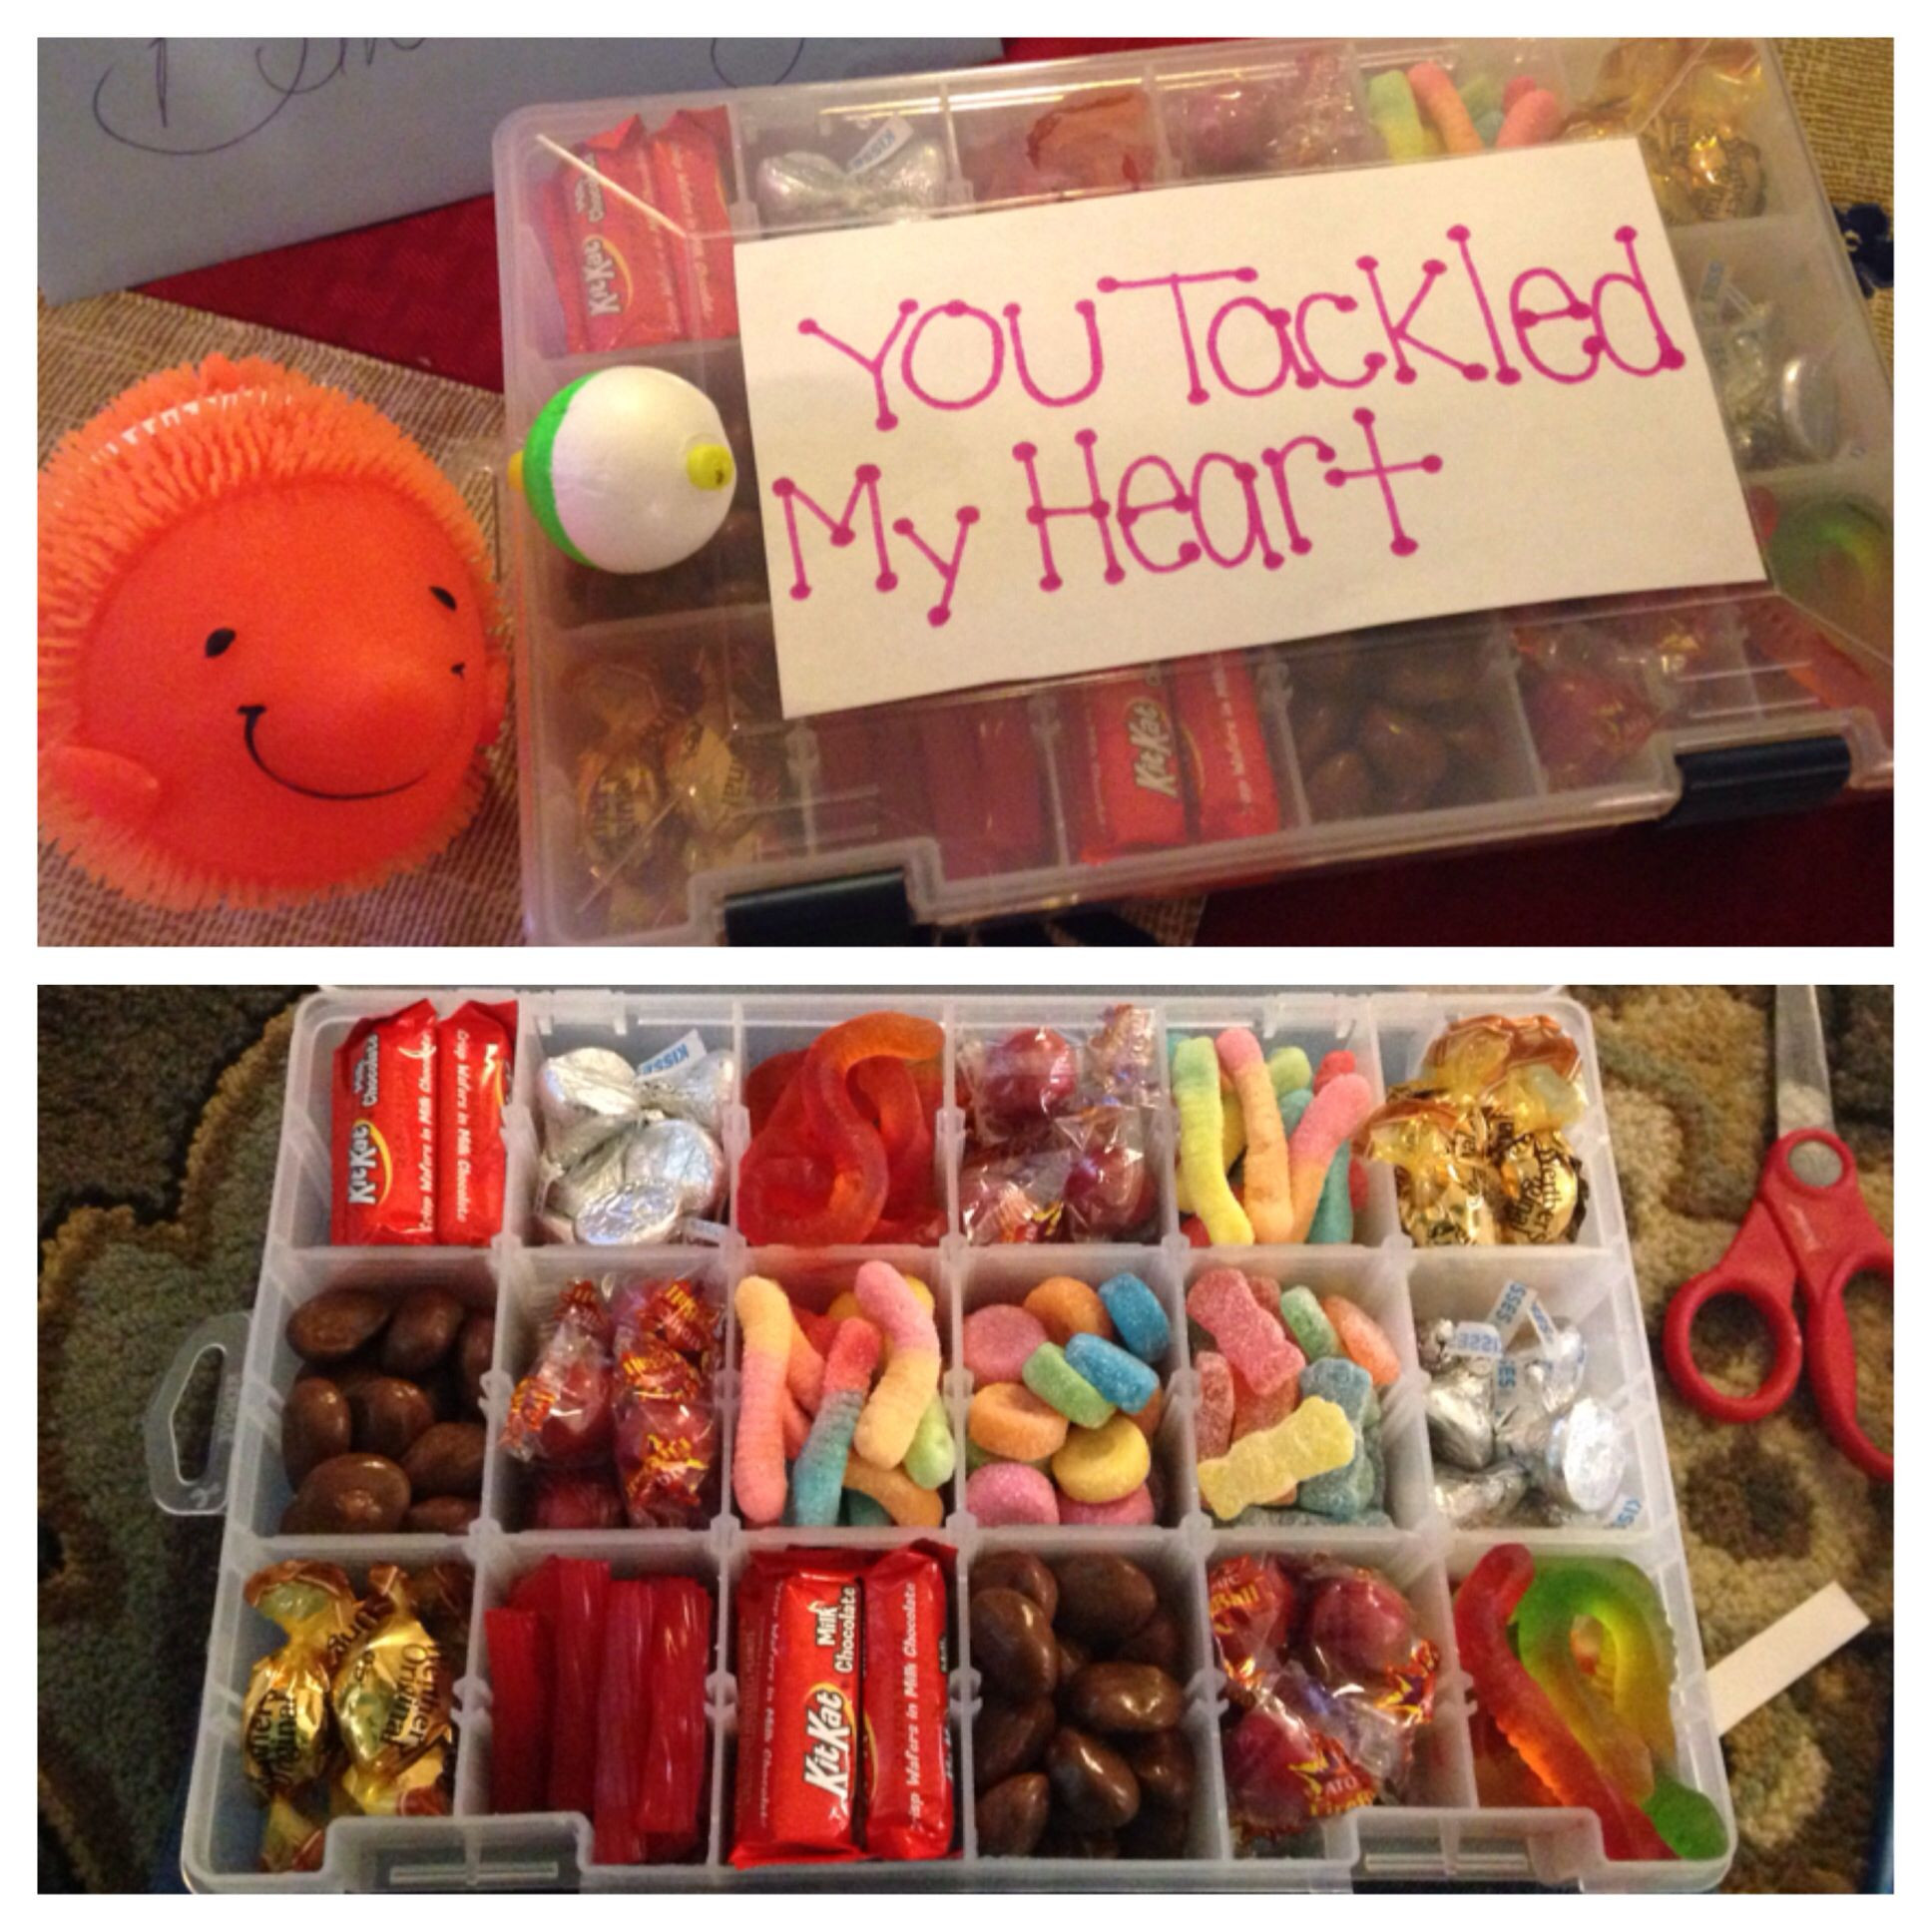 Candy Gift Ideas For Boyfriend
 A tackle box with candy